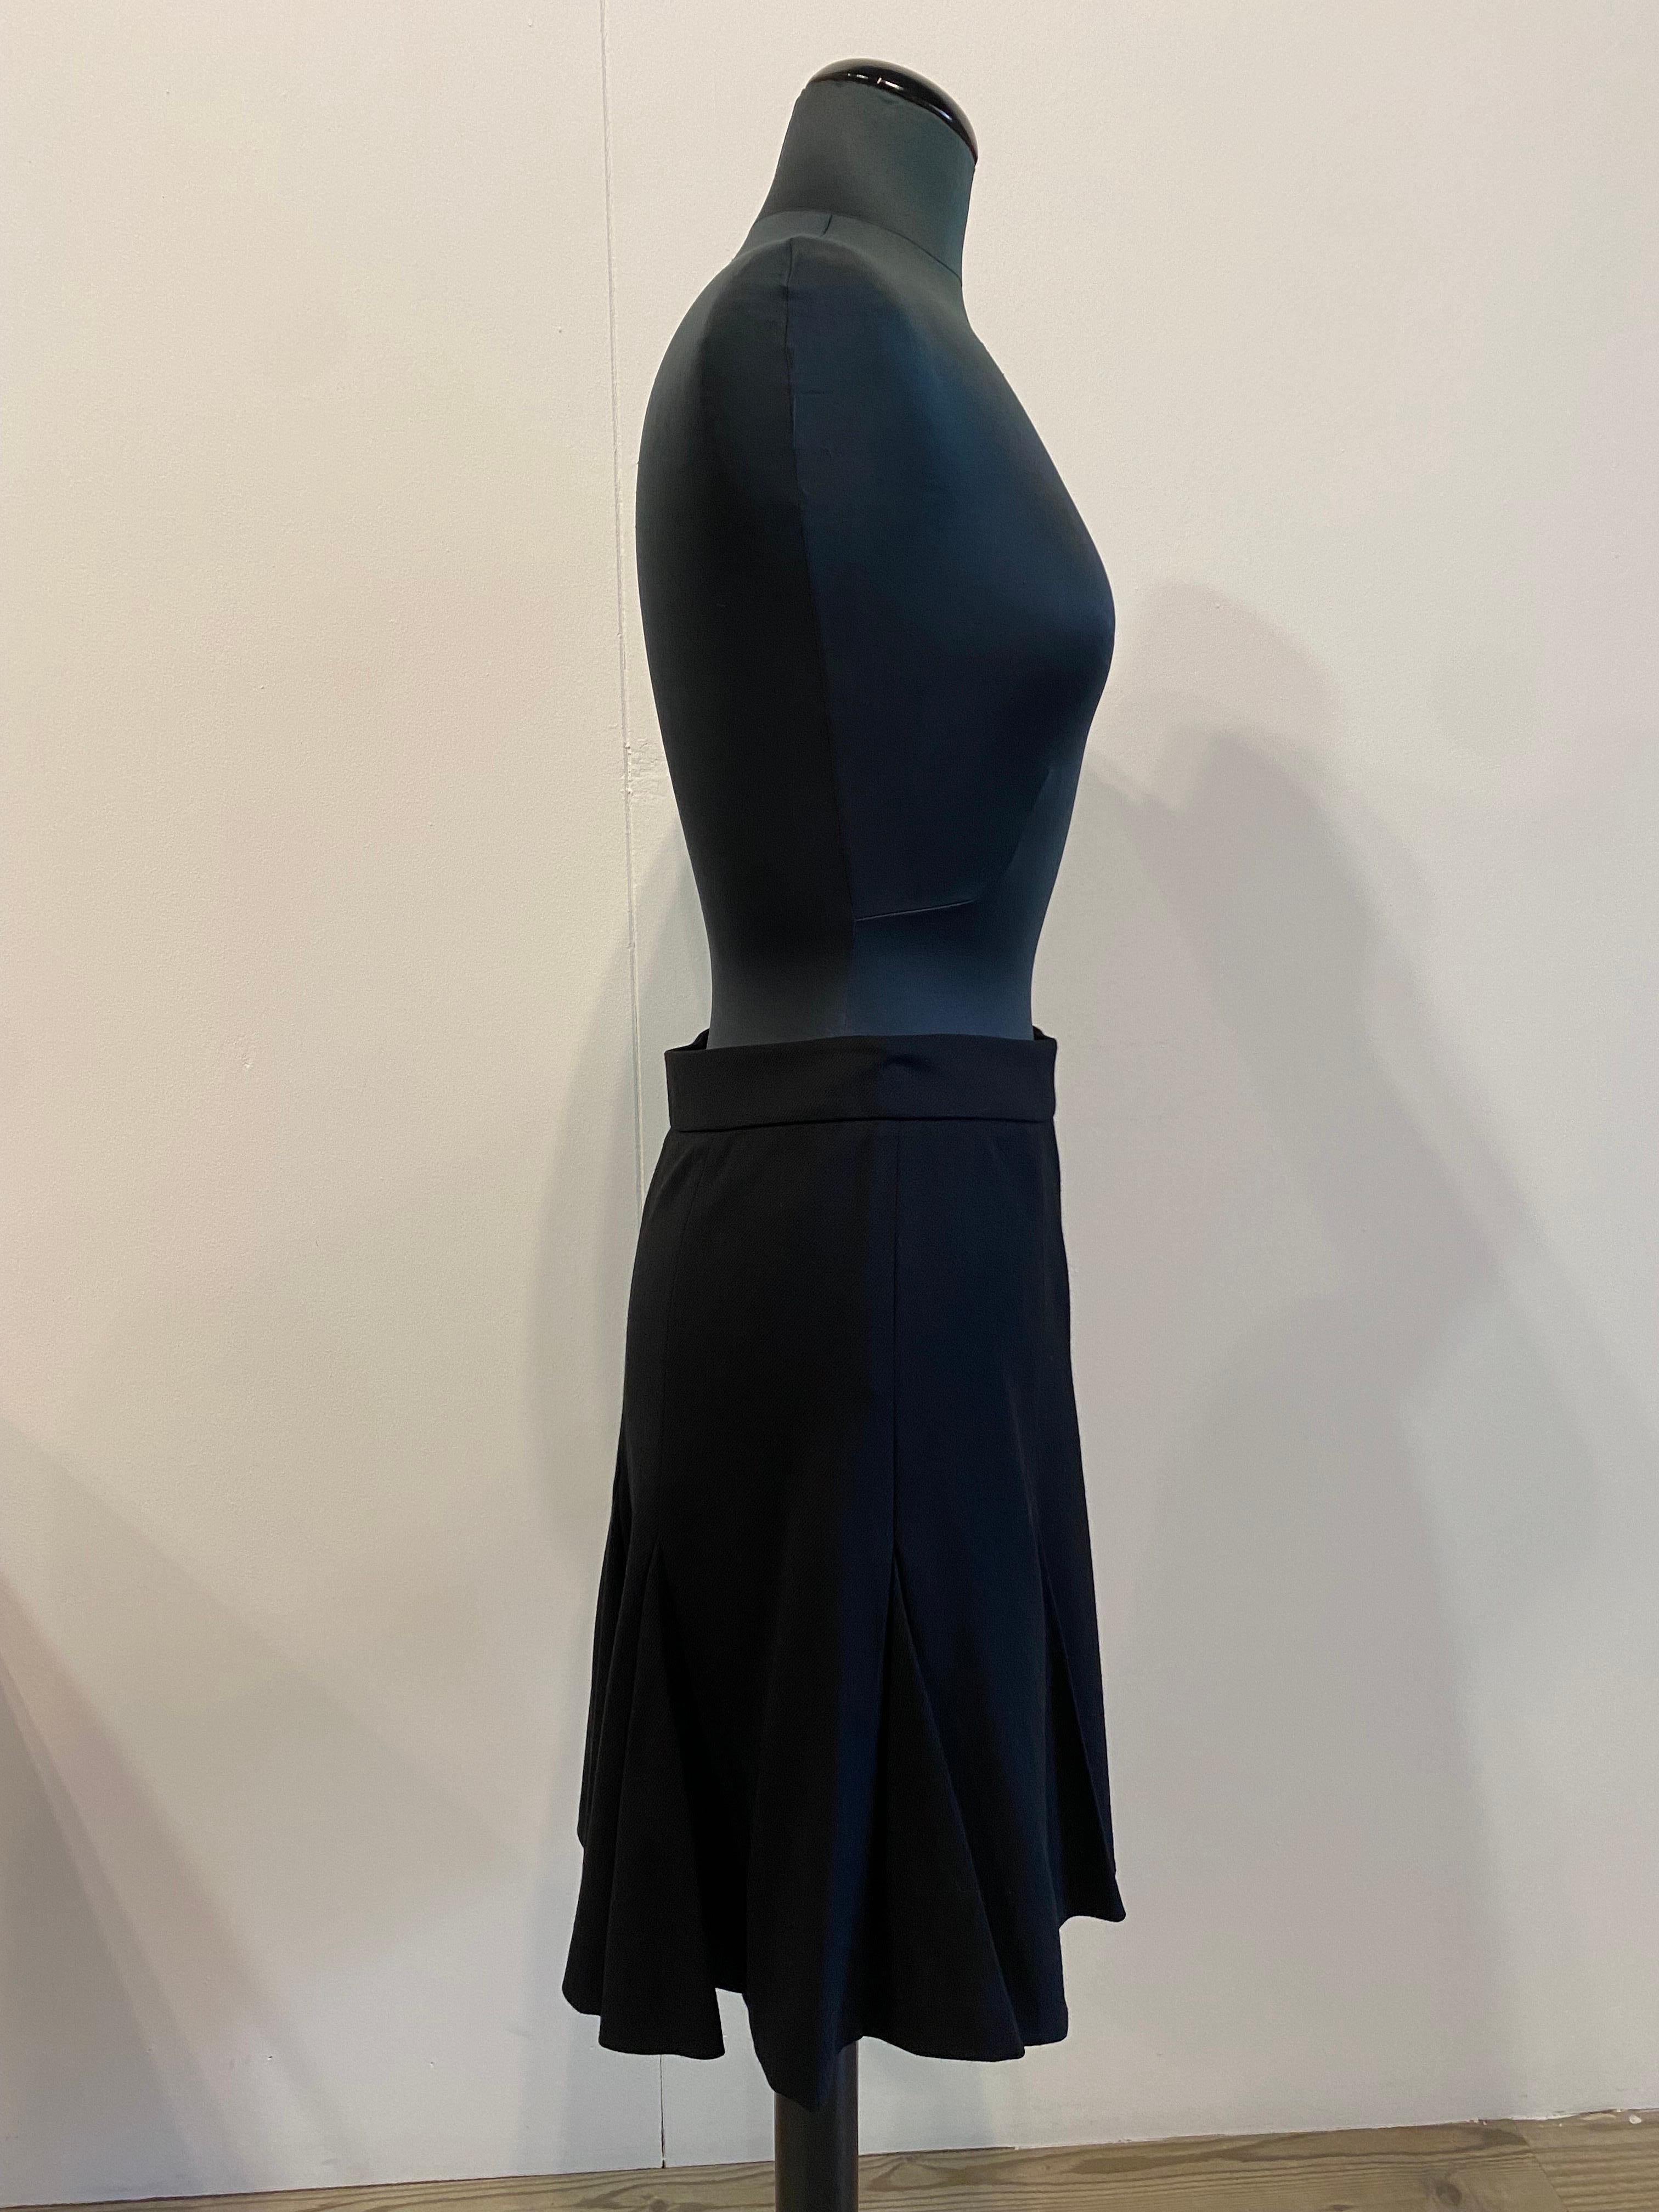 Prada pleated flared black skirt.
Workmanship with very small diagonal ribs.
Made of wool, nylon and other fibres.
It is not lined.
Side zip closure.
Italian size 42.
Waist 36
Length 53
excellent general condition.